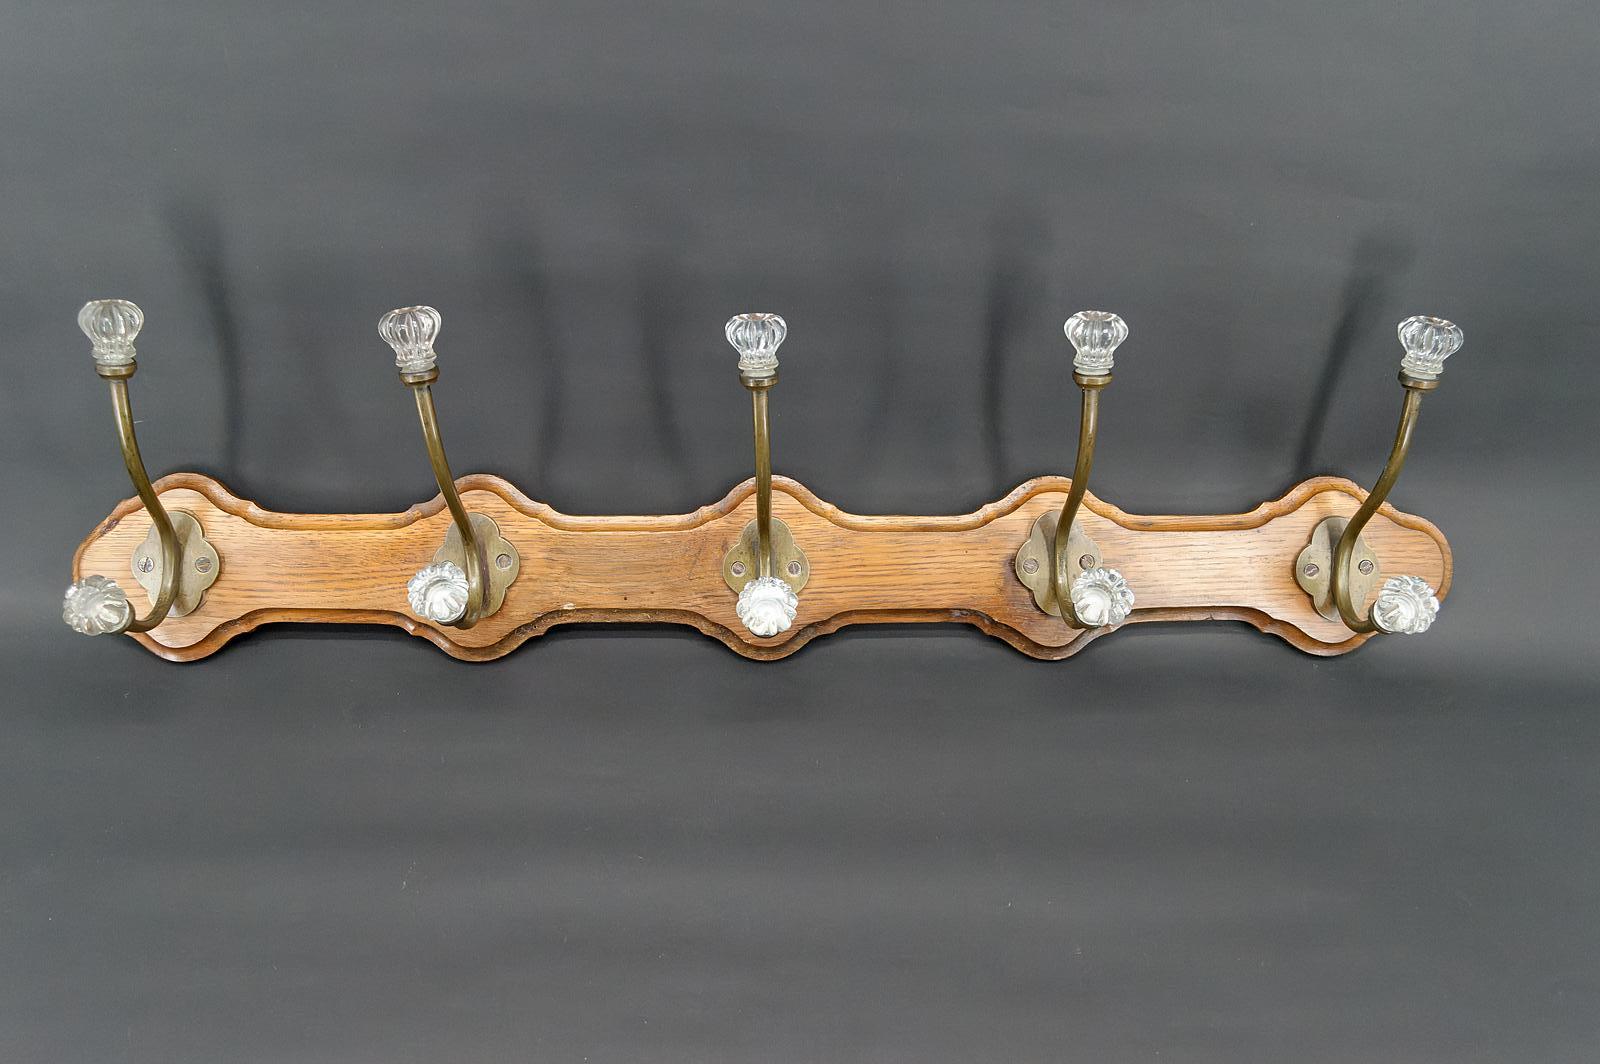 Wall coat rack.
Oak structure mounted with 5 patinated bronze coat hooks finished with cut crystals.

Good condition

Dimensions:
height 21 cm
width 85 cm
depth 16 cm